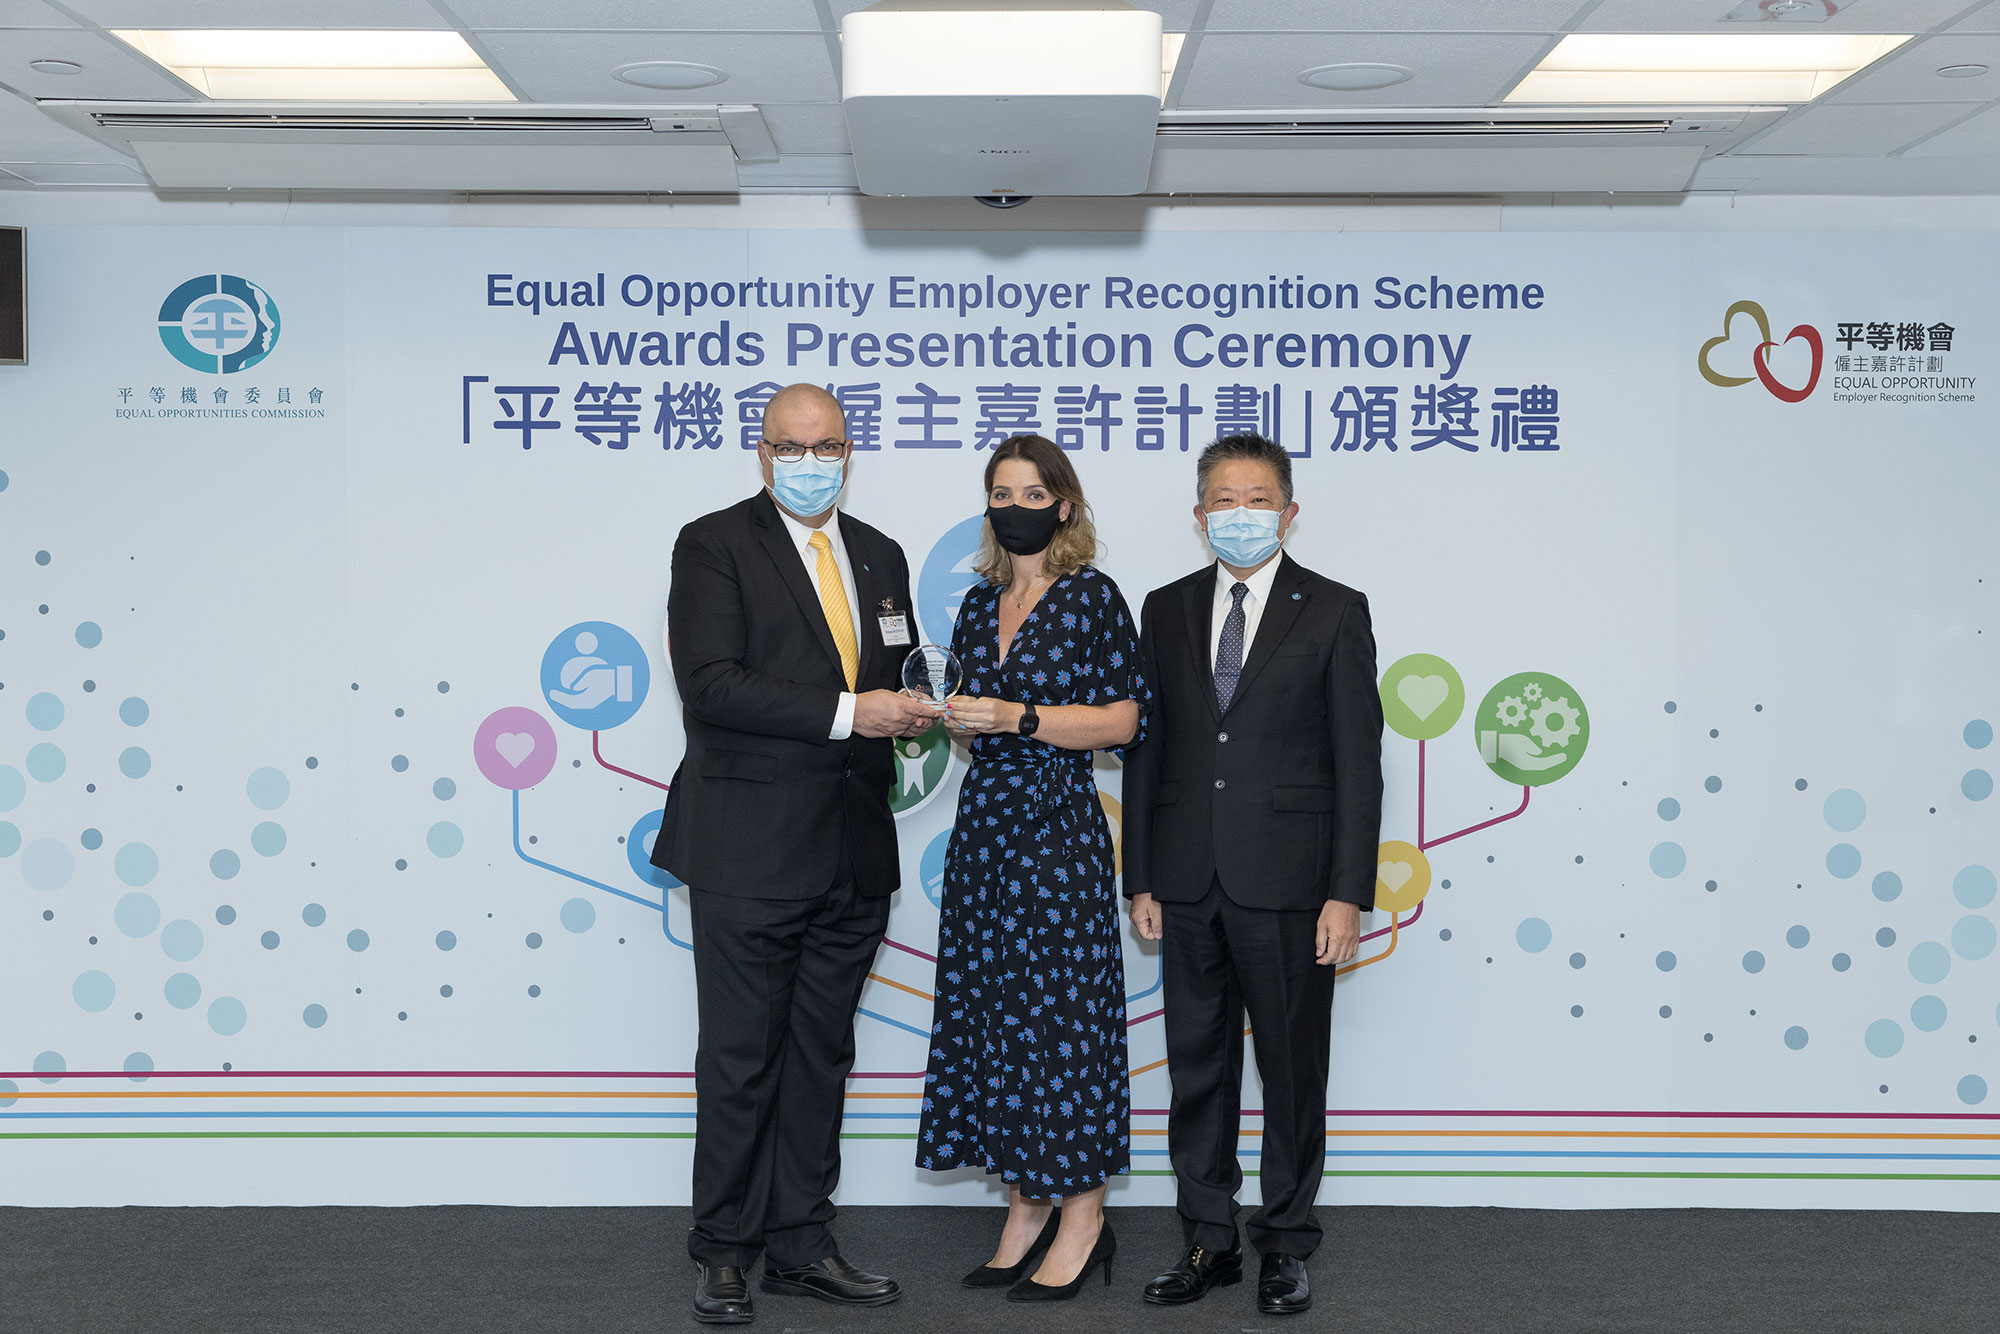 Mr Ricky CHU Man-kin, IDS, Chairperson of the Equal Opportunities Commission (right) and Mr Mohan DATWANI, EOC Member and Convenor of the Legal and Complaints Committee (left), present the trophy to the representative of Tag Hong Kong (centre), winner of the Outstanding SME Award of the Equal Opportunity Employer Recognition Scheme. 